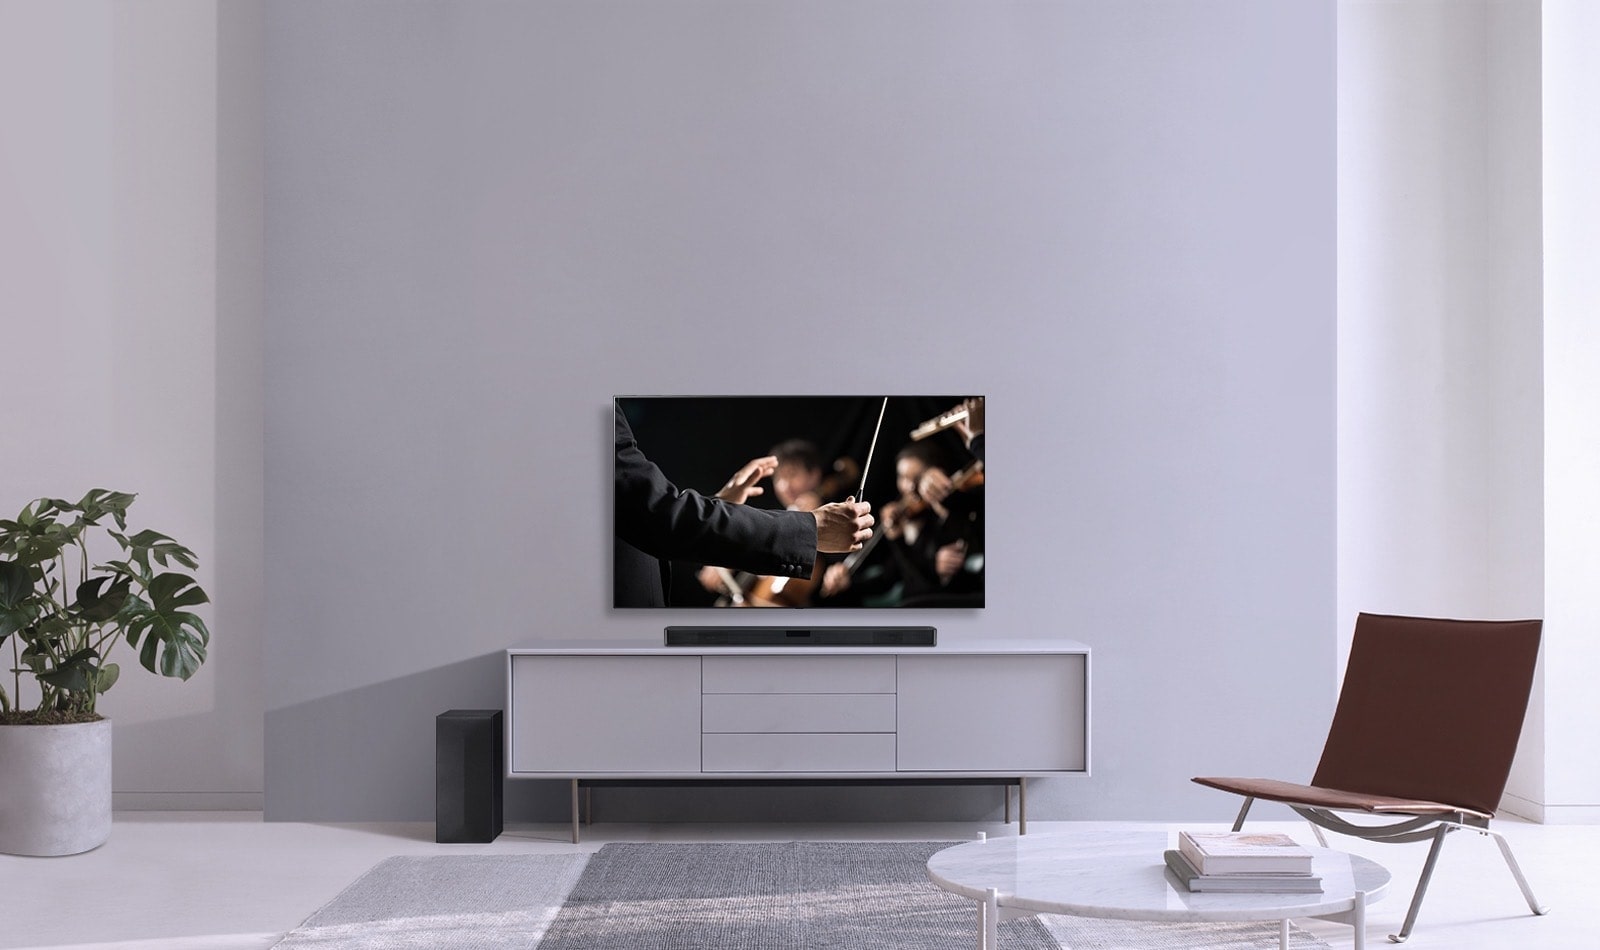 Image of a living room with home theatre set up